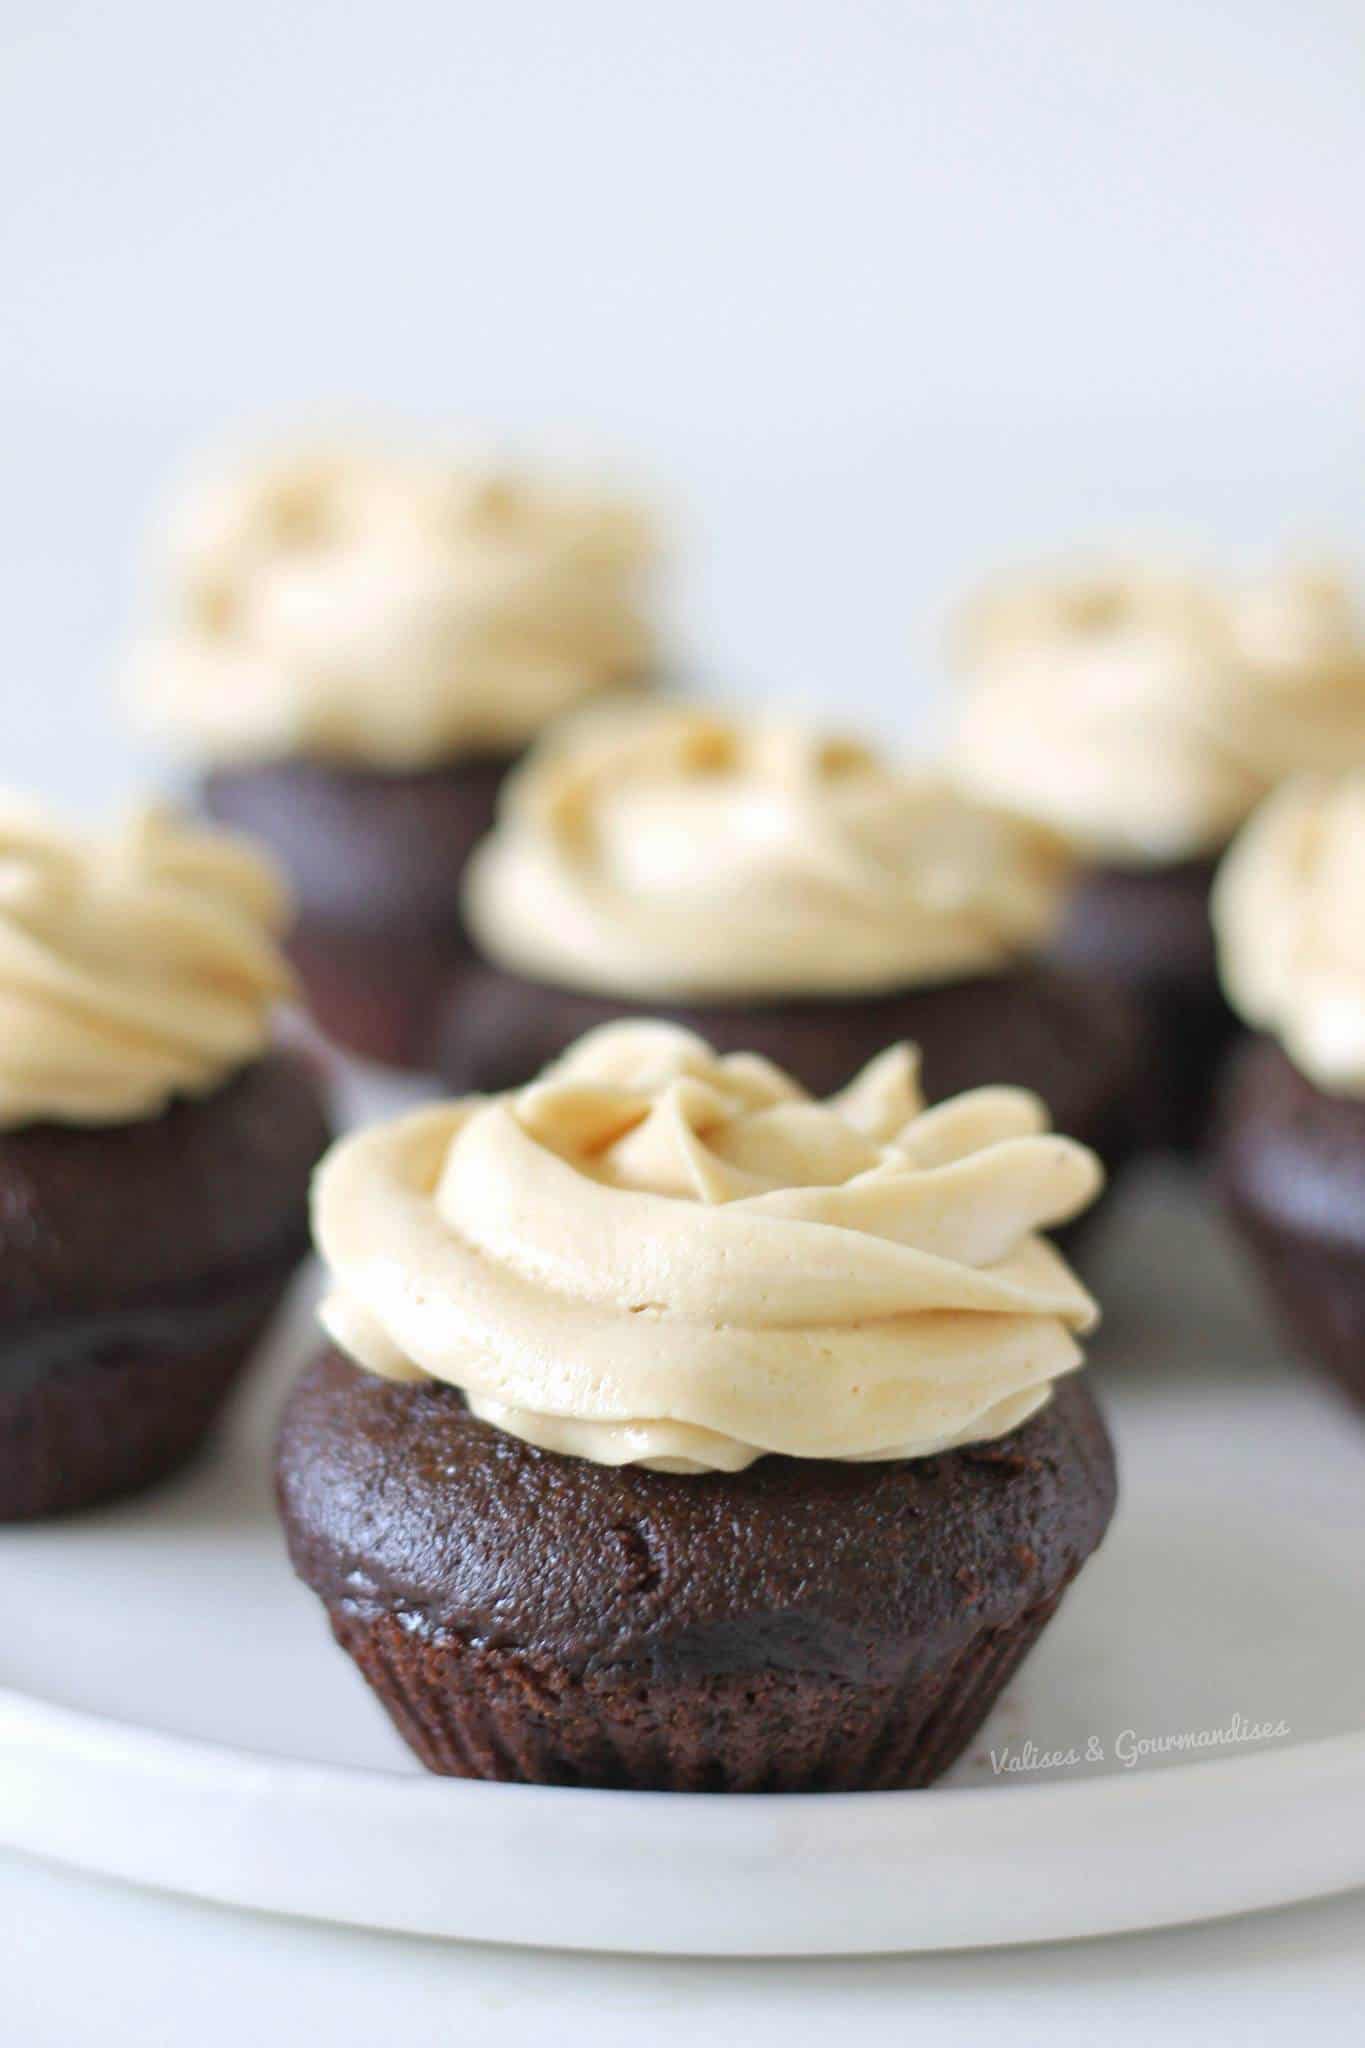 Vegan chocolate cupcakes and peanut butter frosting